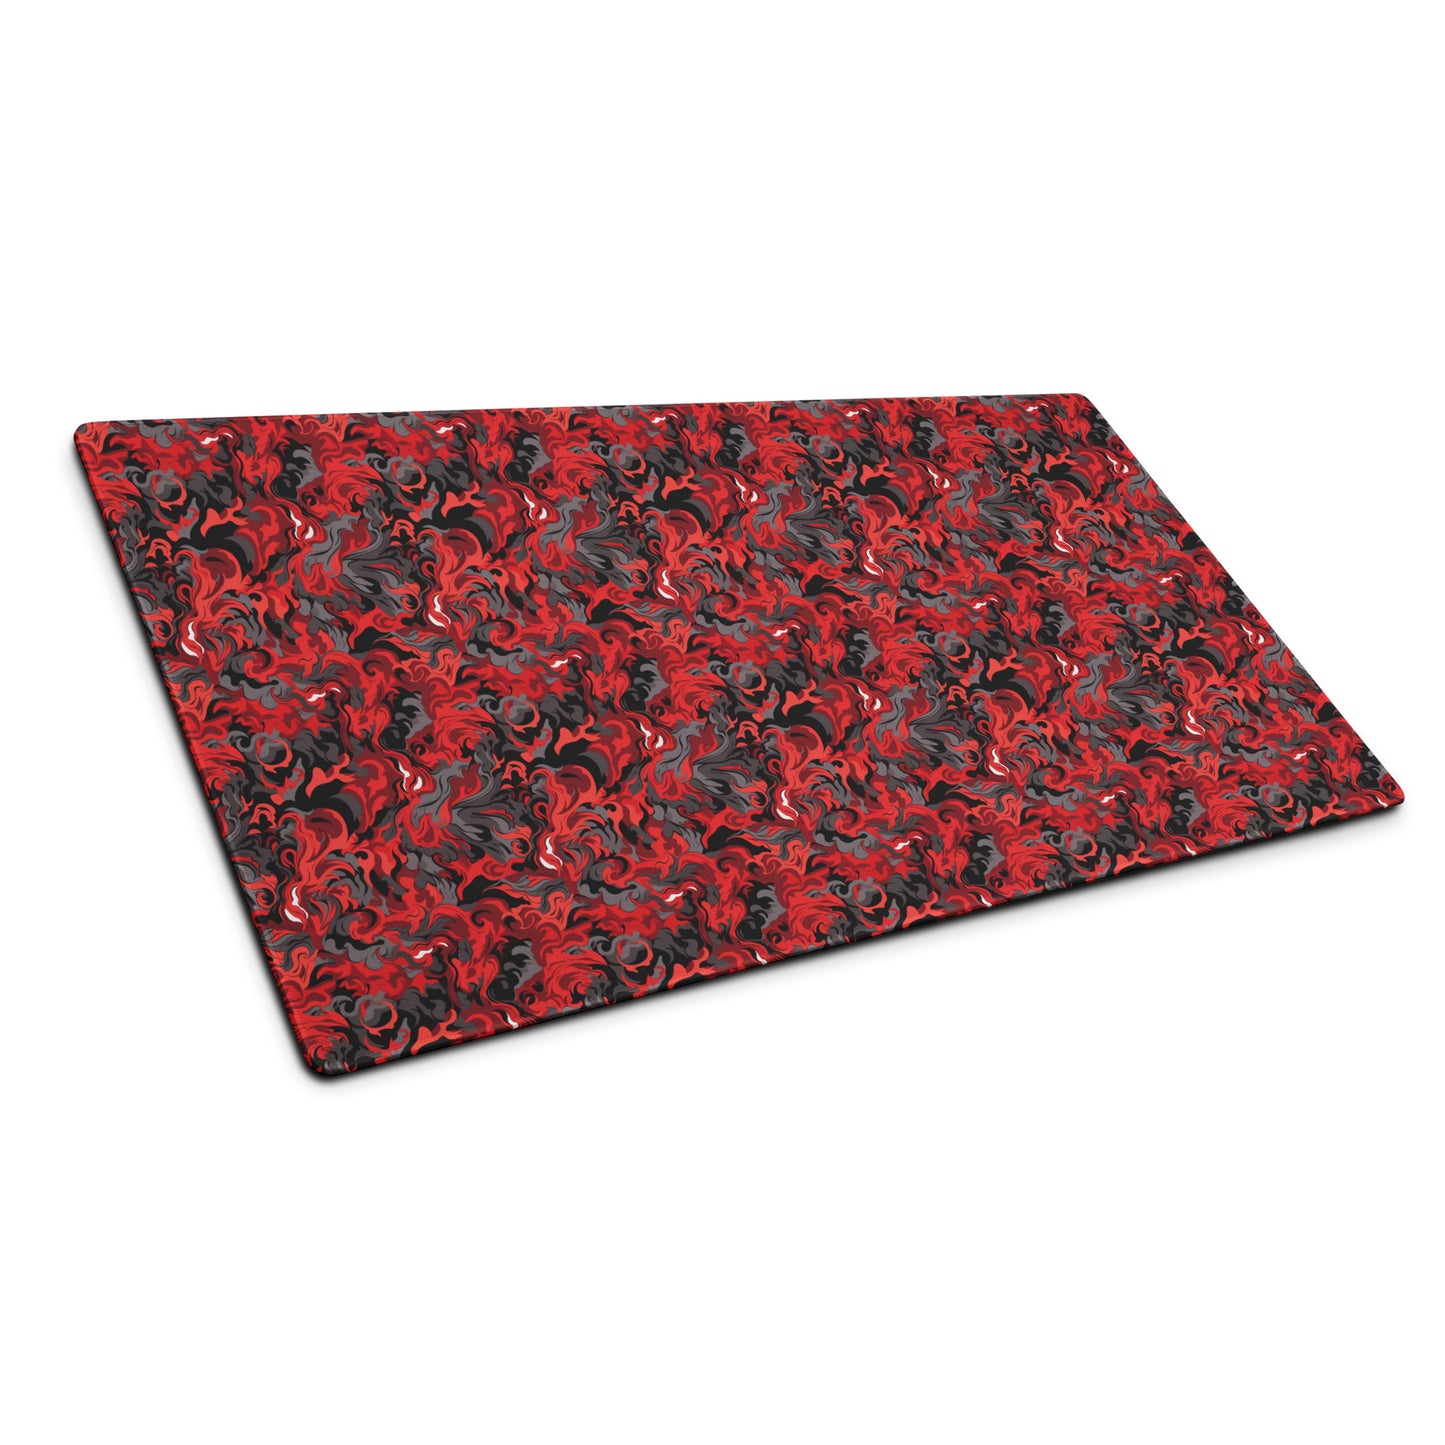 A 36" x 18" desk pad with a black and red camo pattern sitting at an angle.